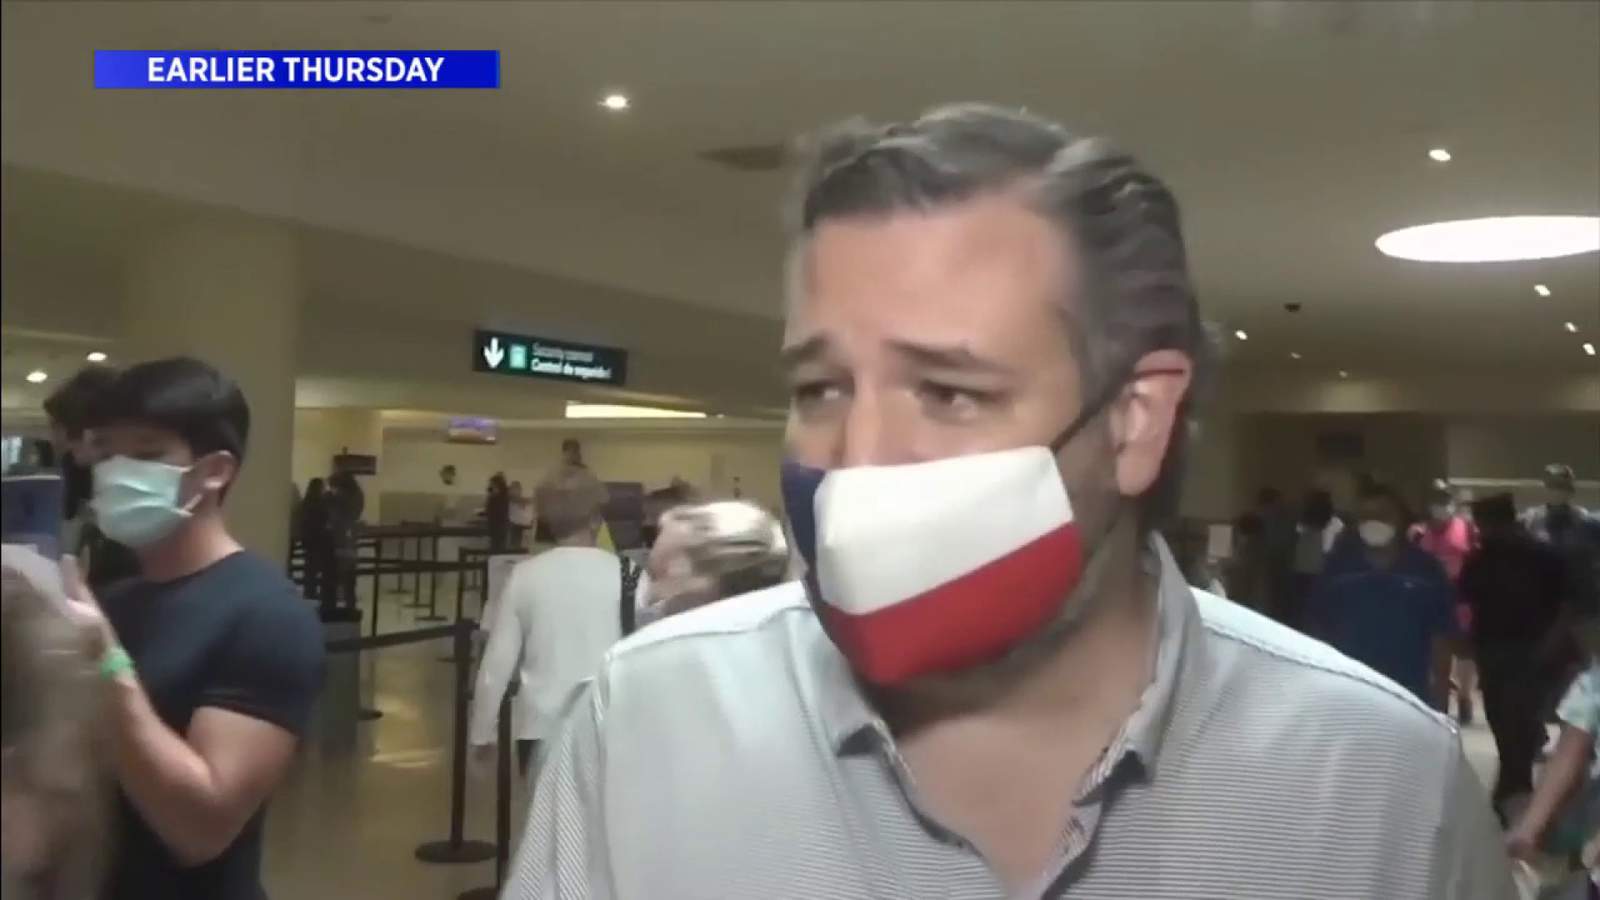 ‘Obviously a mistake’: Cruz returns from Cancun after uproar